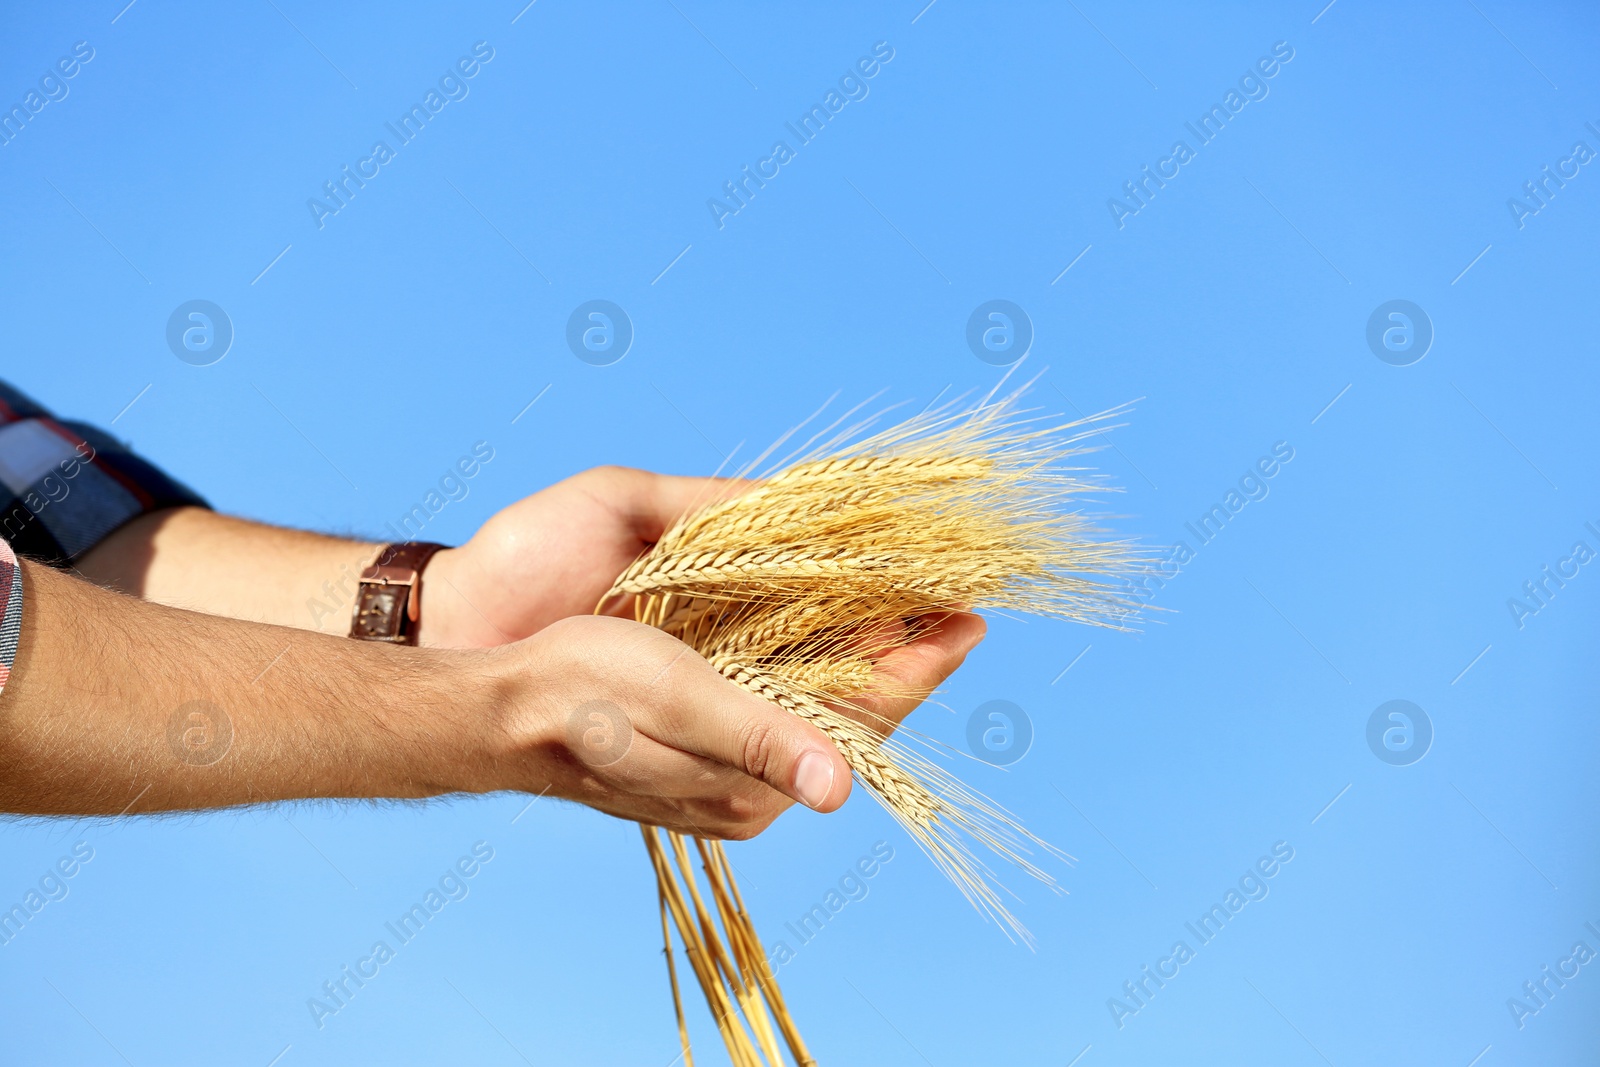 Photo of Farmer with wheat spikelets against blue sky, closeup. Cereal grain crop